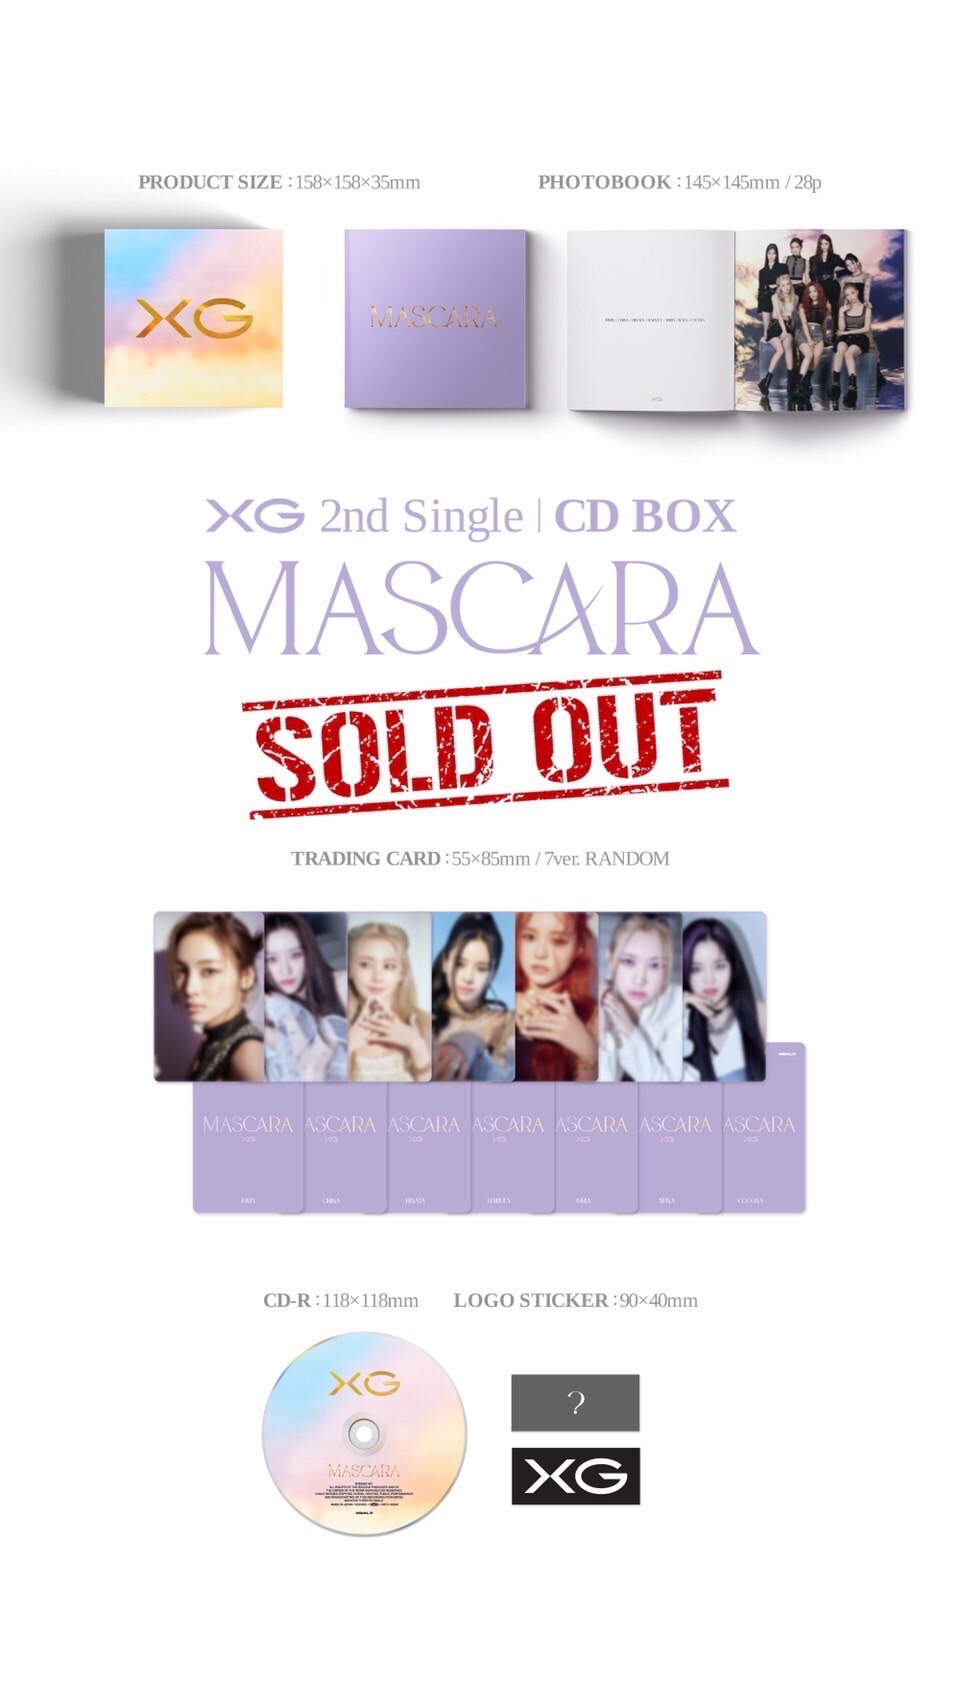 MASCARA CD Box sets are now out of stock. - NEWS | XG - Official Site